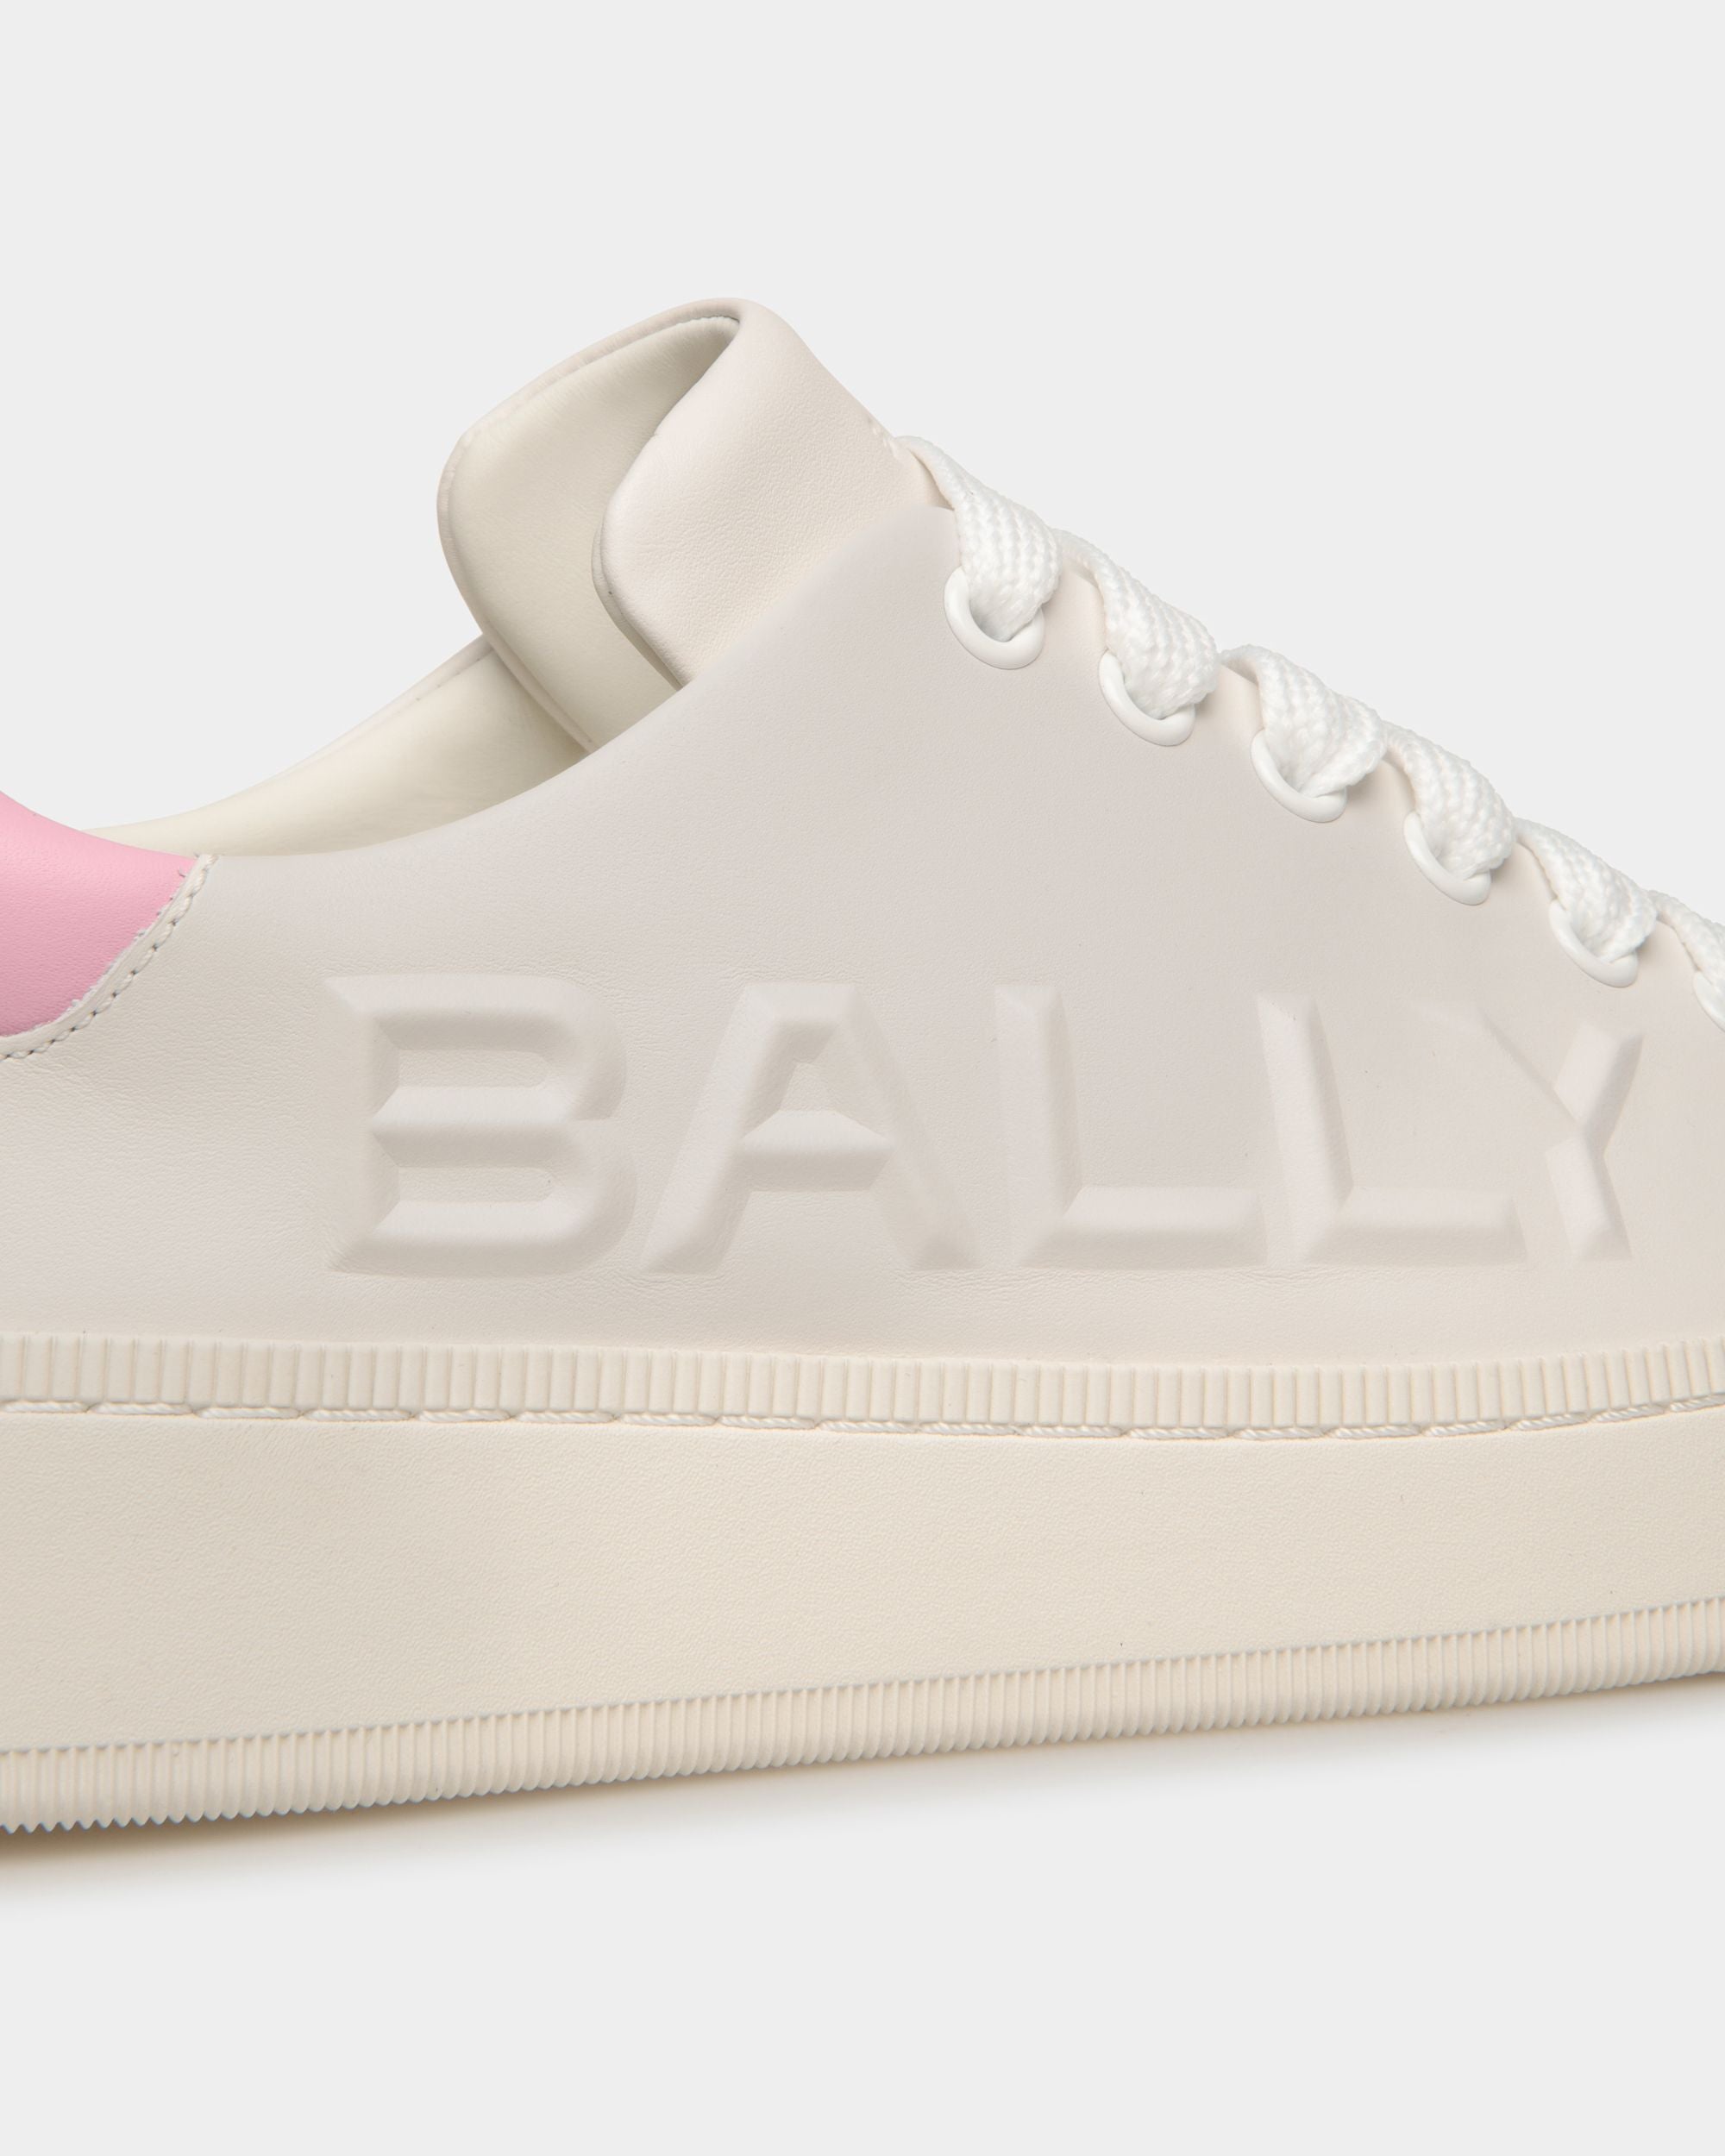 Women's Luxury Shoes: Leather Heels, Boots & Sneakers | Bally